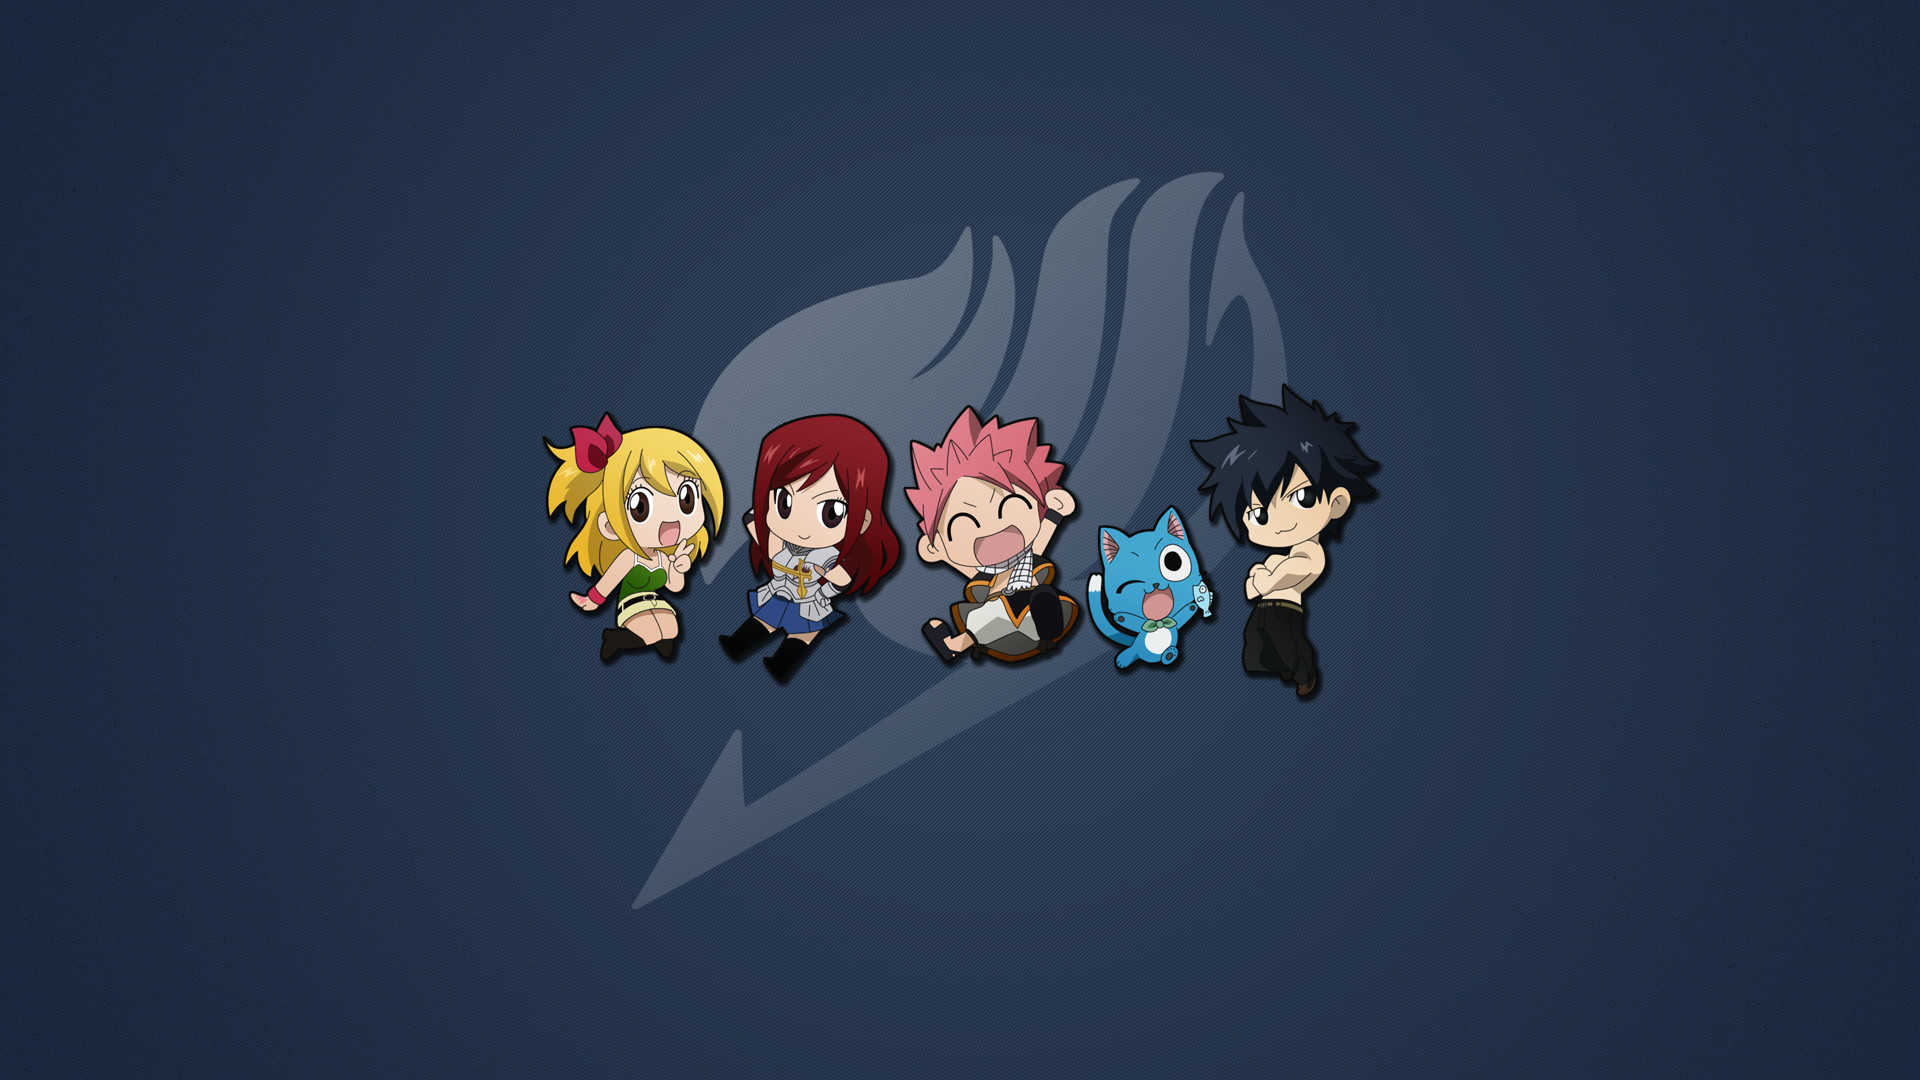 1920x1080 Awesome Fairy Tail Wallpapers | Fairy Tail Wallpapers